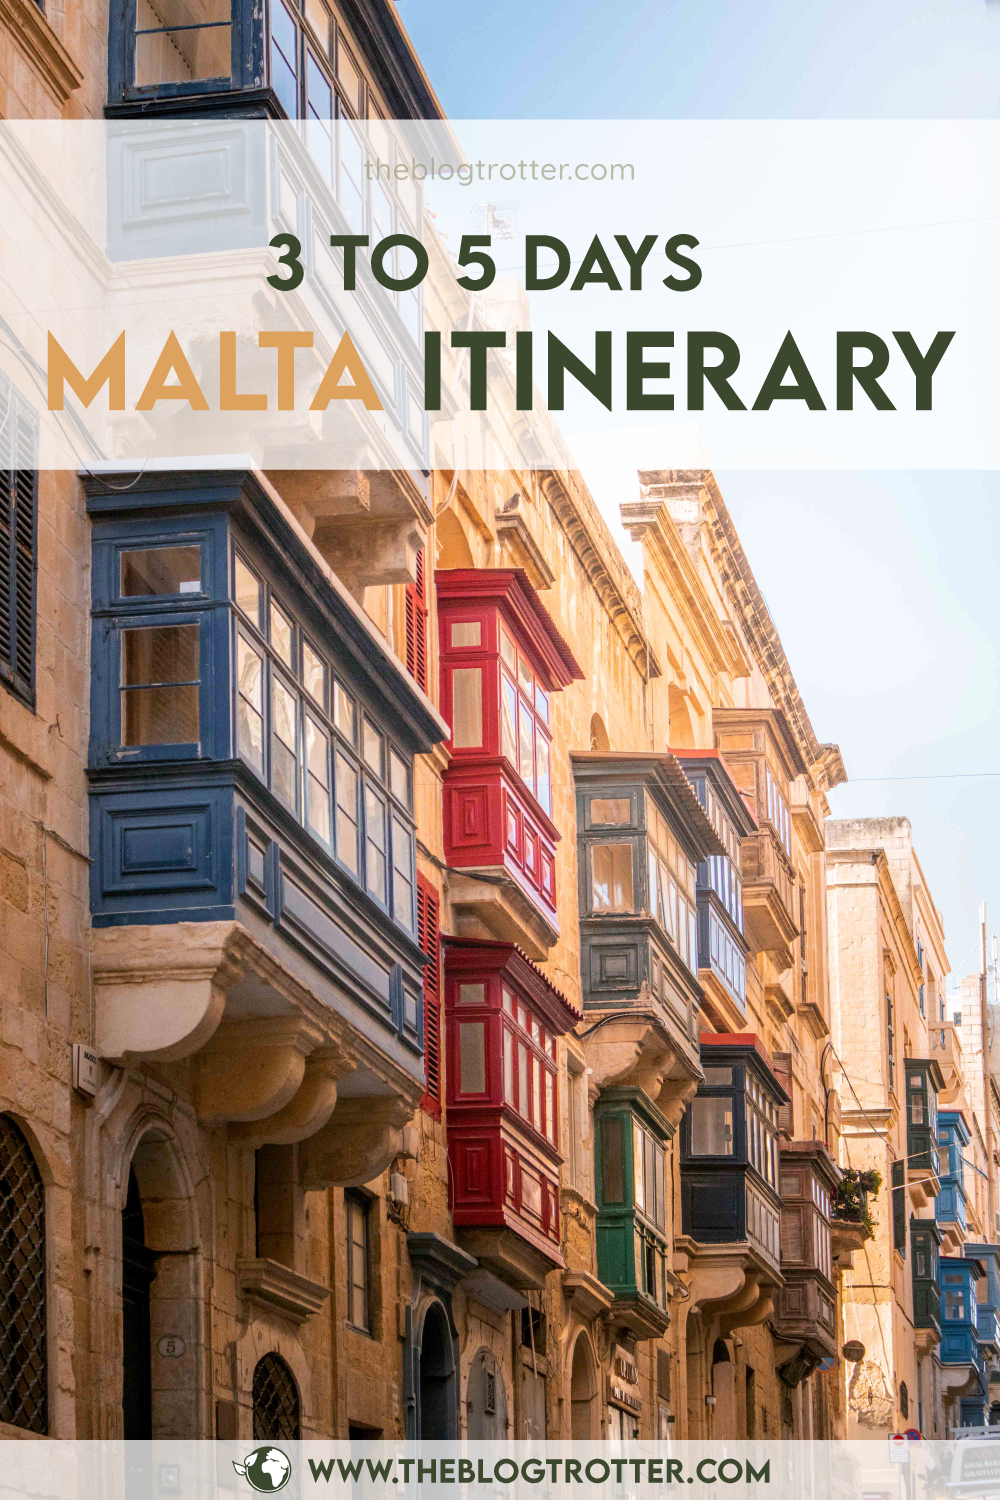 Malta itinerary article visual for Pinterest - Option 3